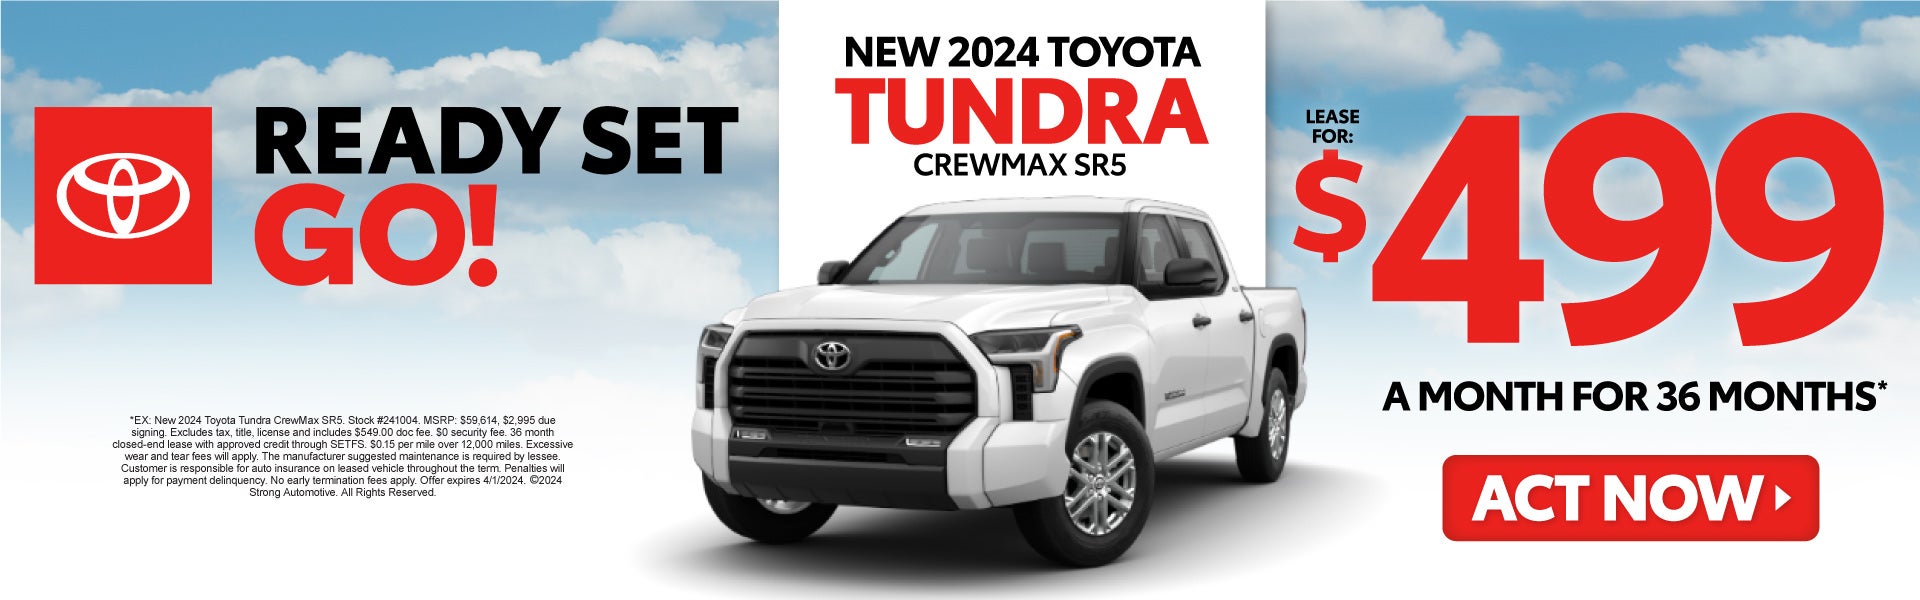 New 2024 Toyota Tundra $499/mo for 36 months* - Act Now